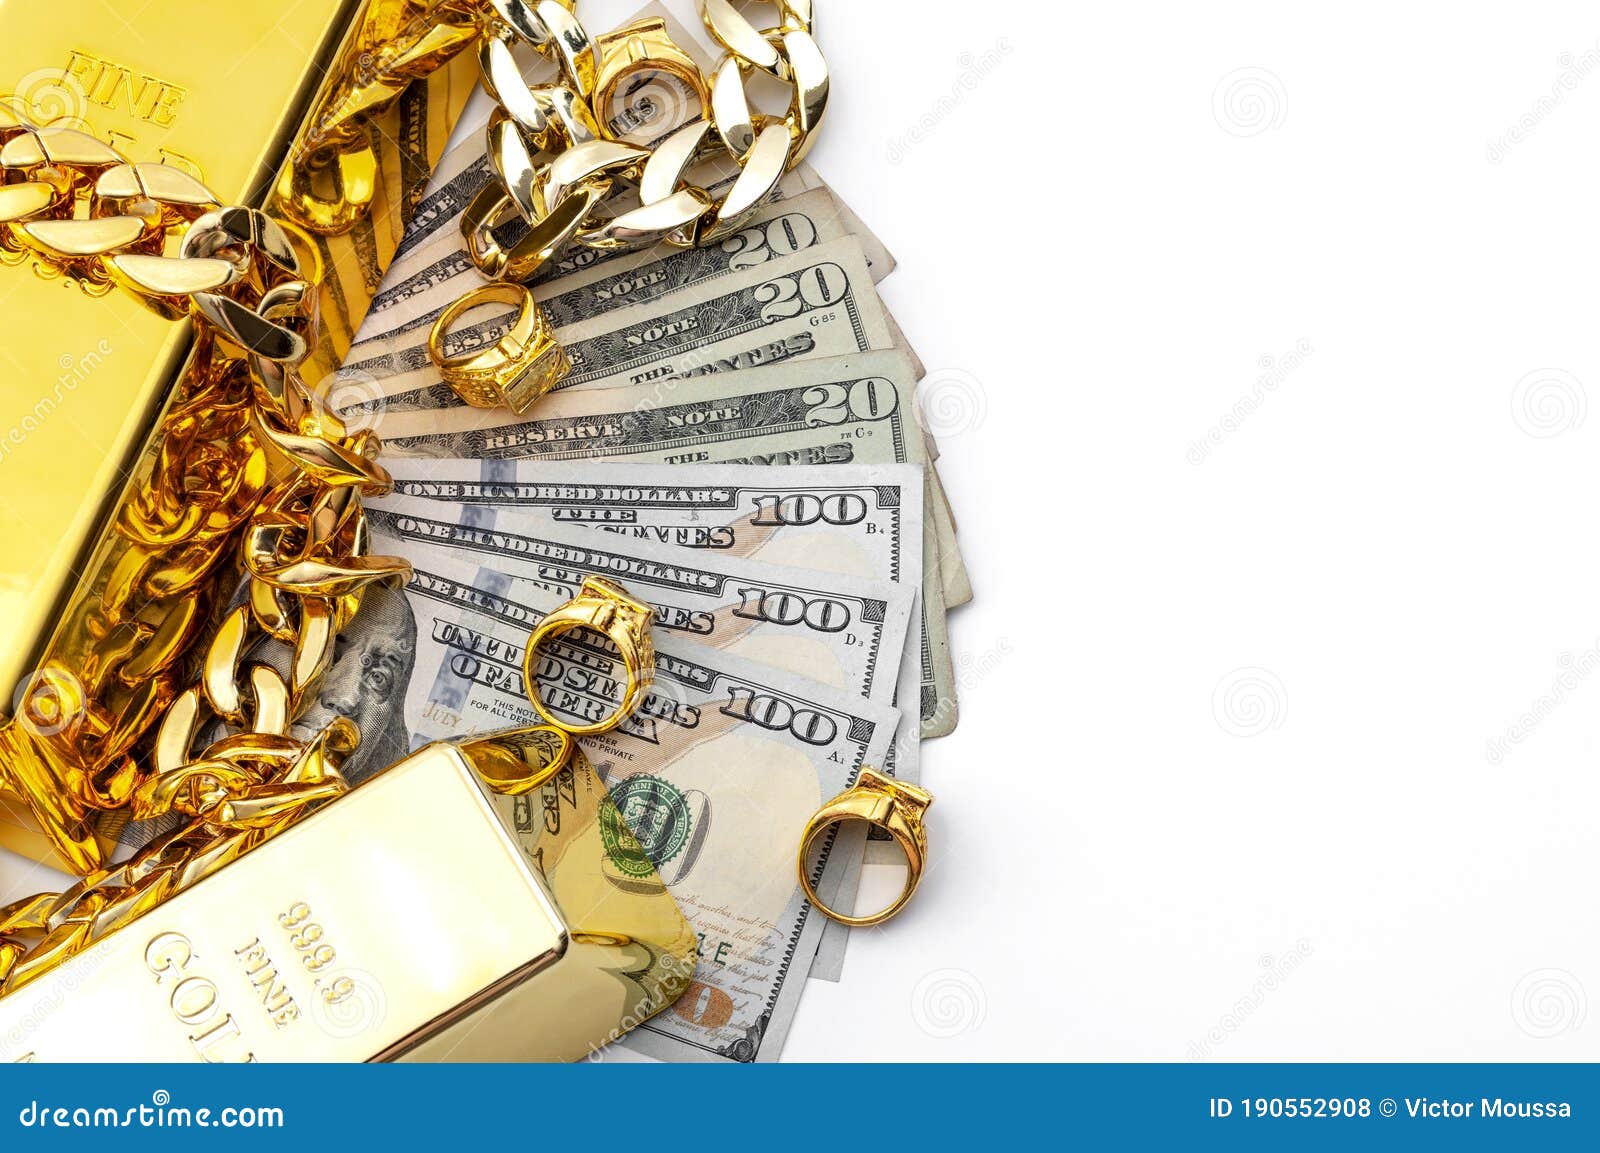 jewelry buyer, pawn shop and buy and sell precious metals concept theme with a pile of cash in us dollars, golden rings, necklace